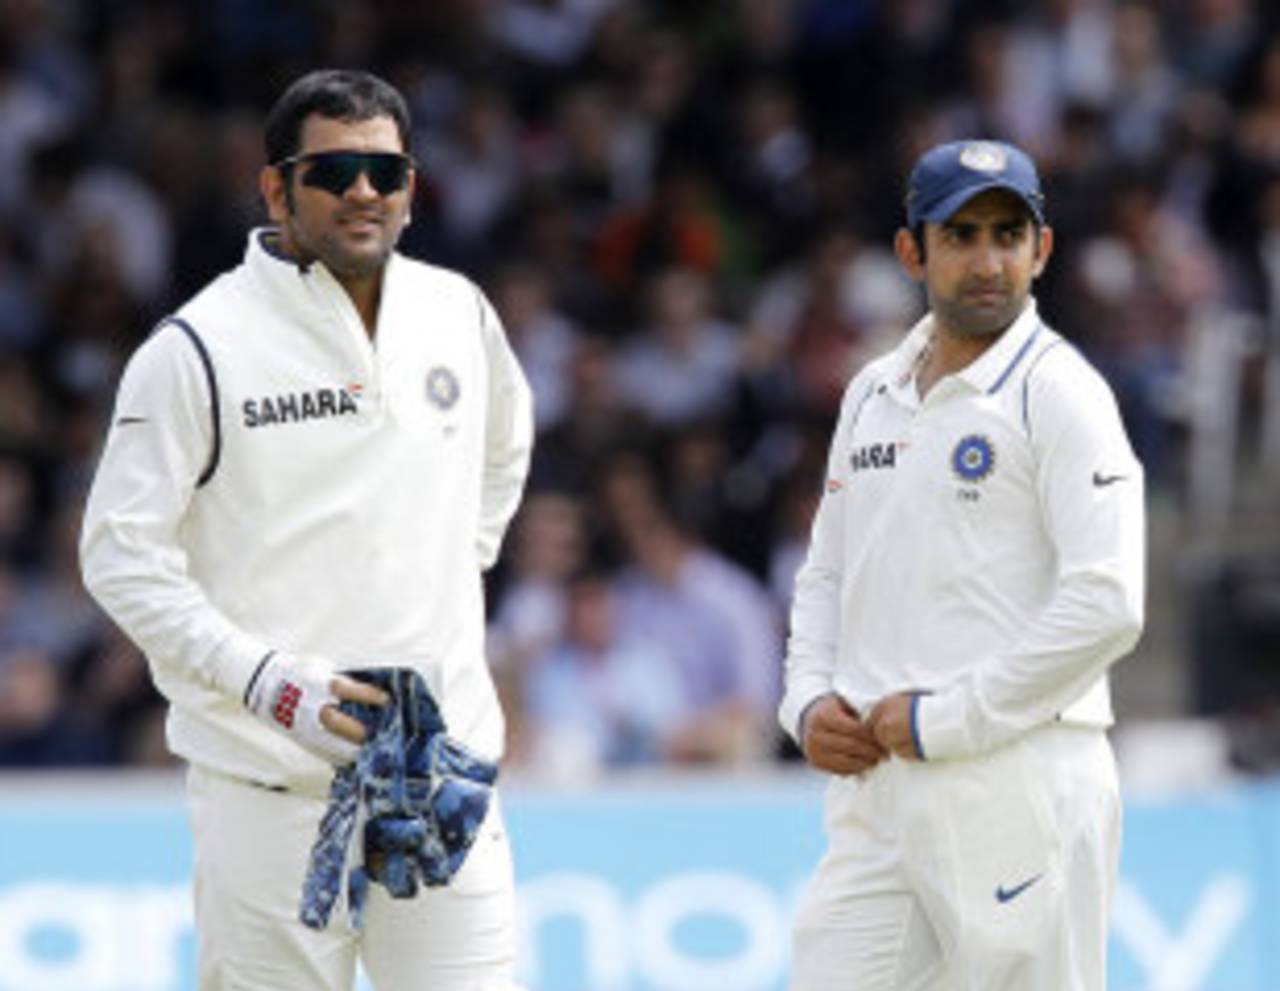 MS Dhoni and Gautam Gambhir have a chat, England v India, 1st Test, Lord's, 4th day, July 24, 2011